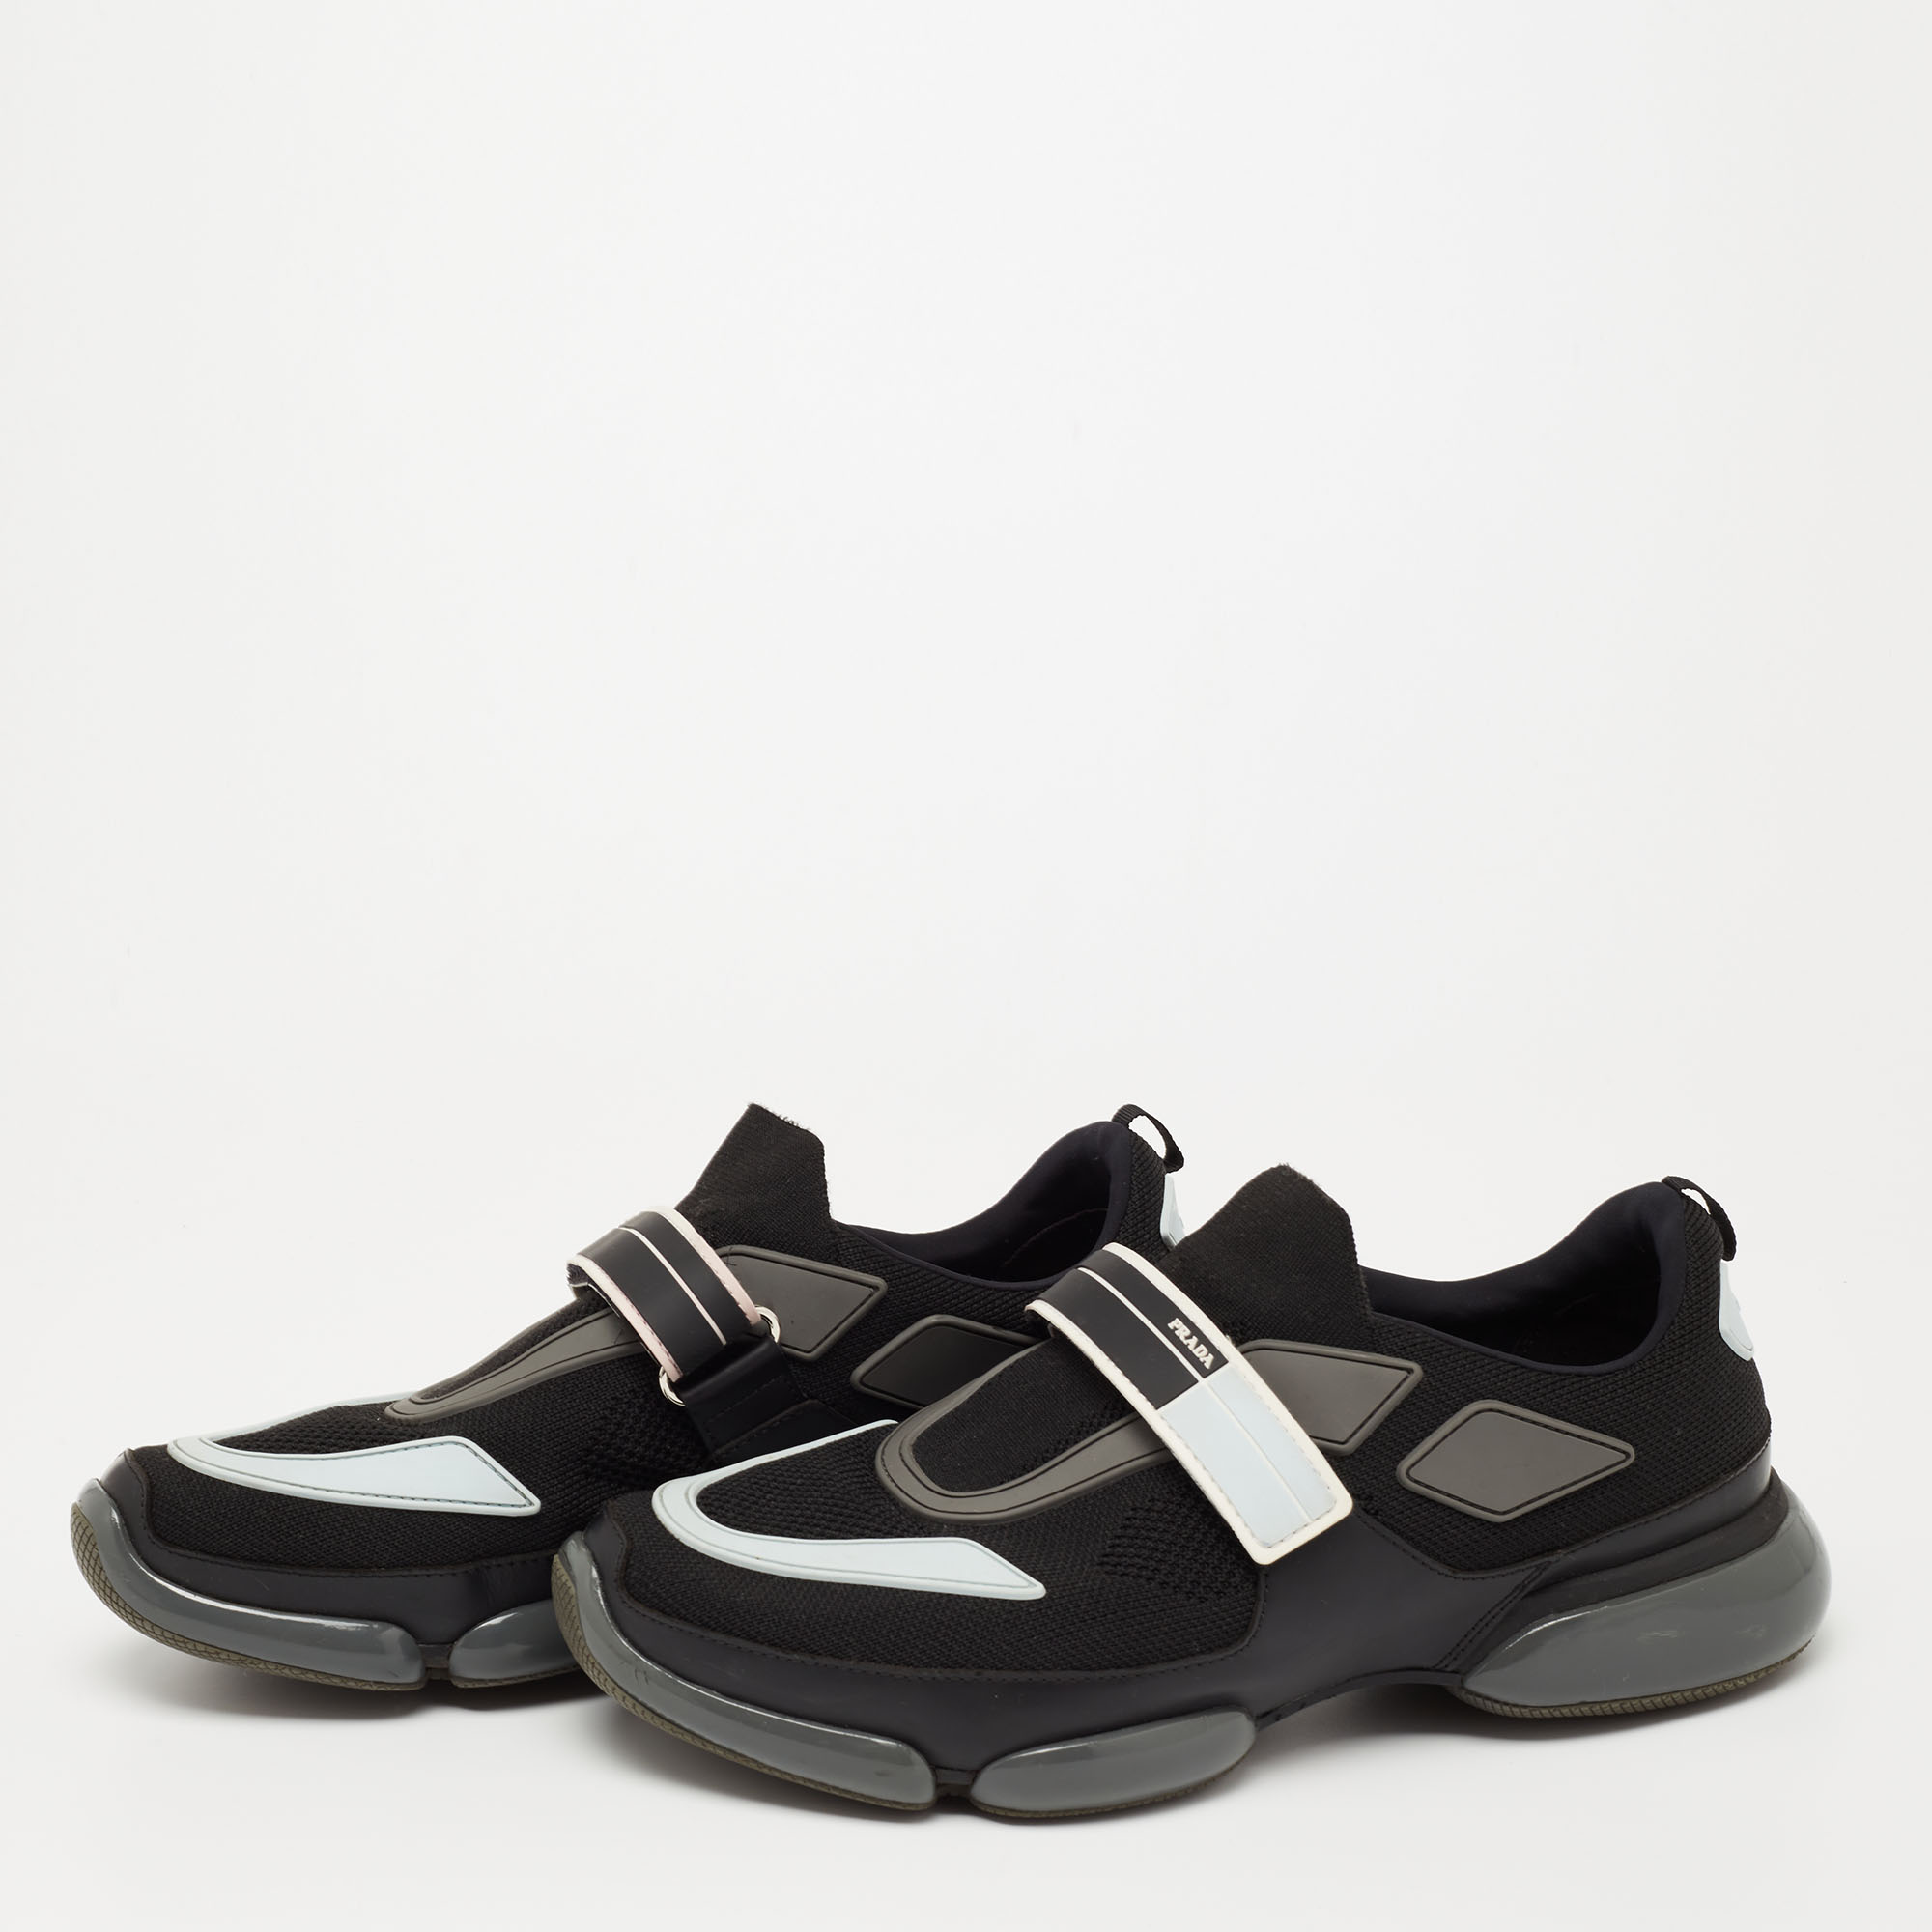 

Prada Black Knit Fabric And Leather Cloudbust Sneakers Size